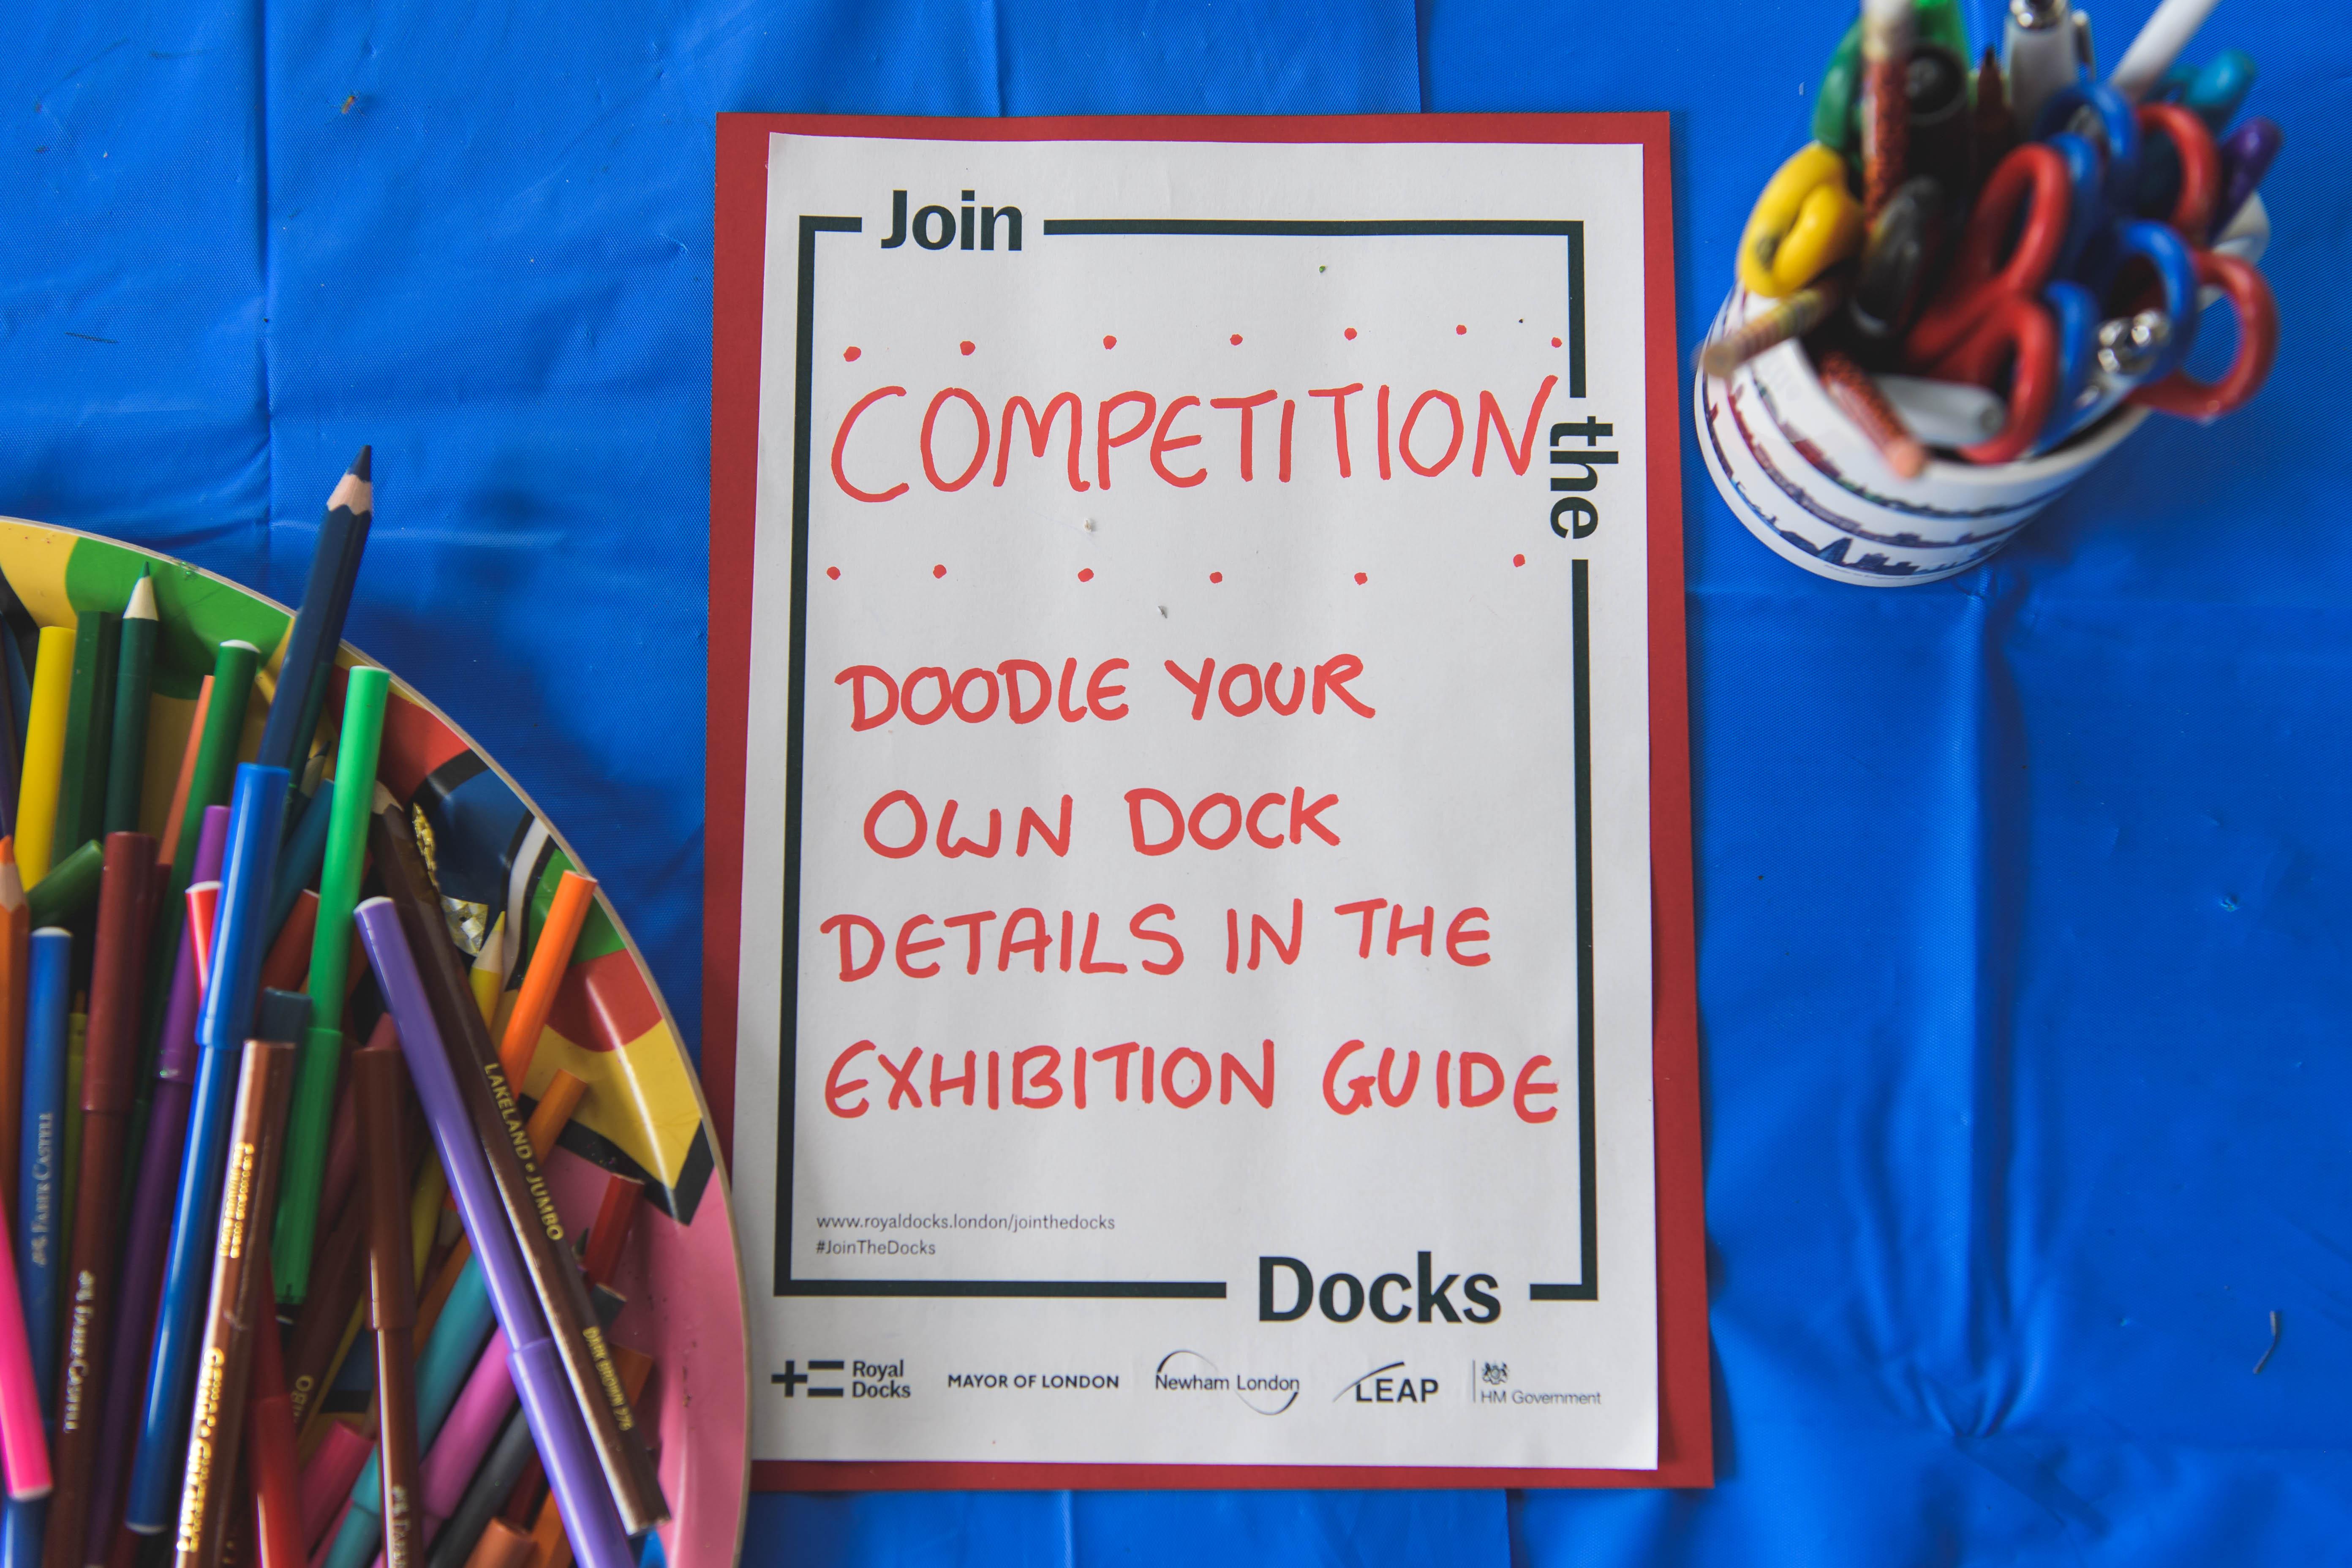 Join the Docks Doodling Competition